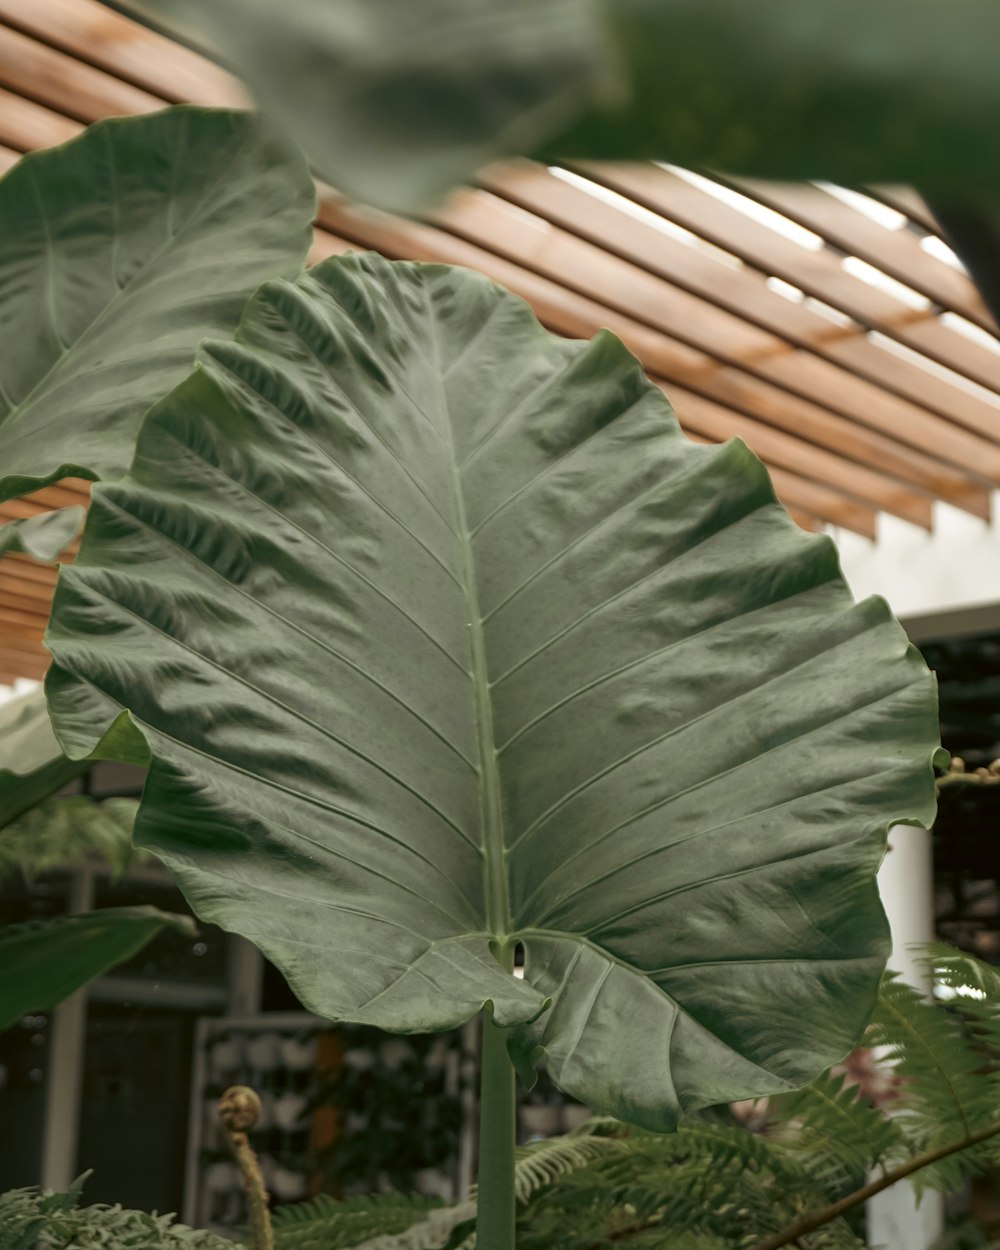 a large green leaf is hanging from a ceiling